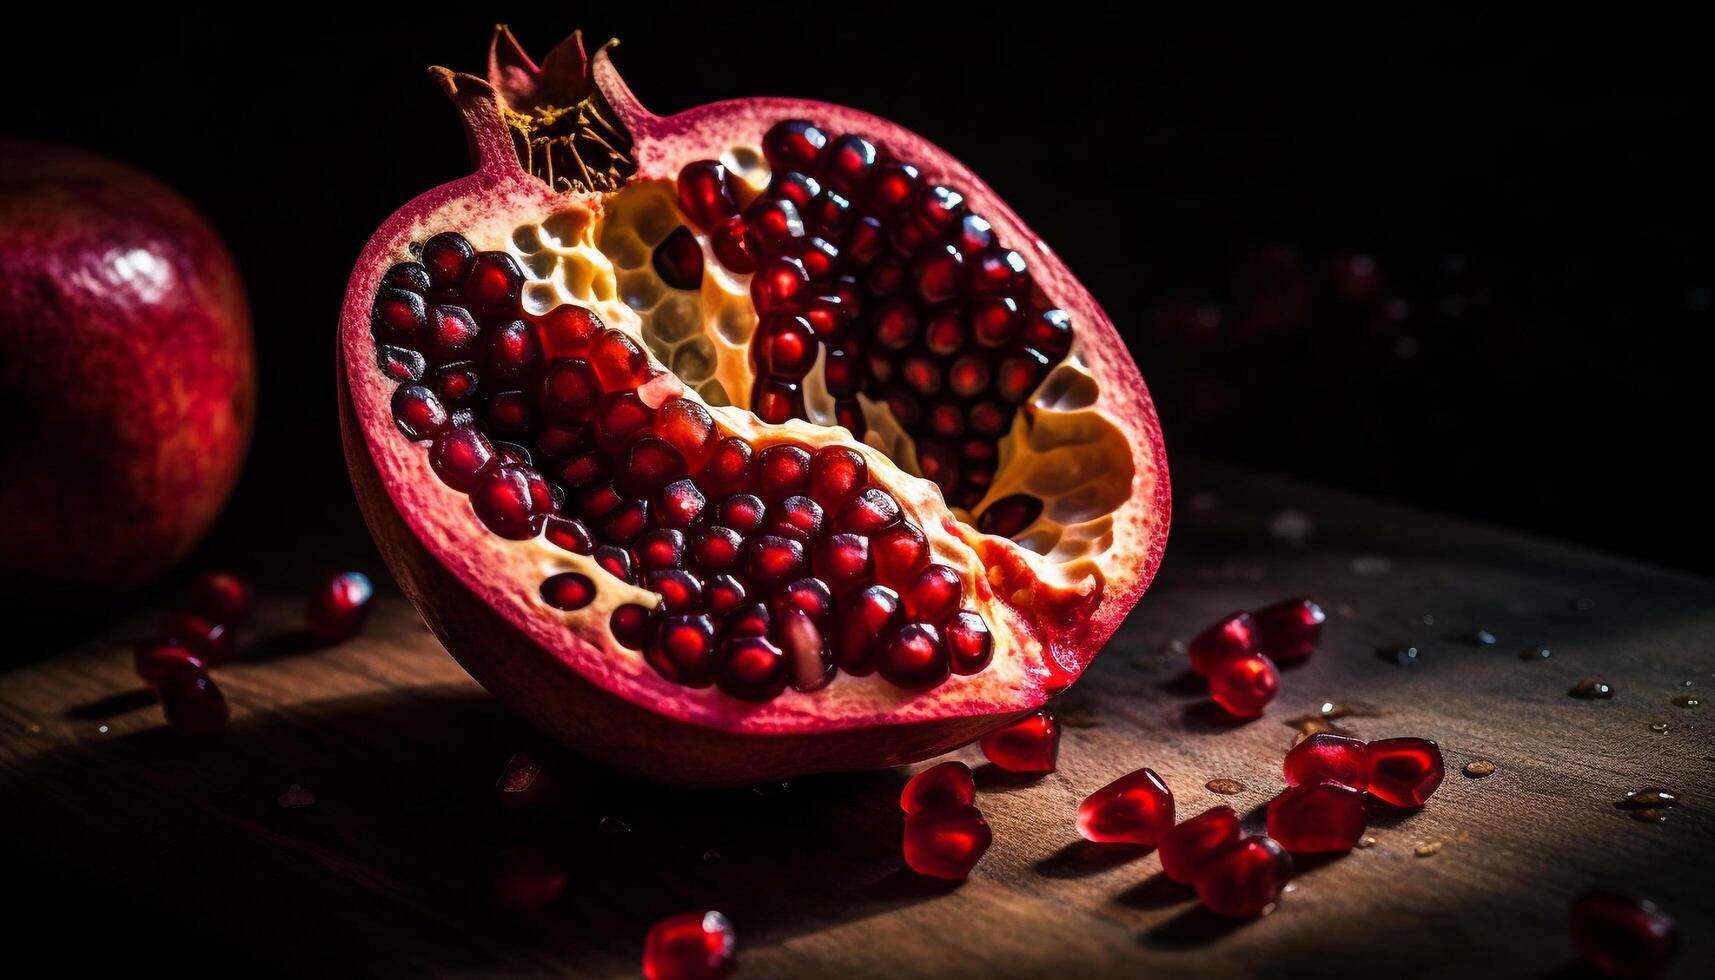 Juicy pomegranate slice on rustic wooden table, a healthy snack generated by AI photo